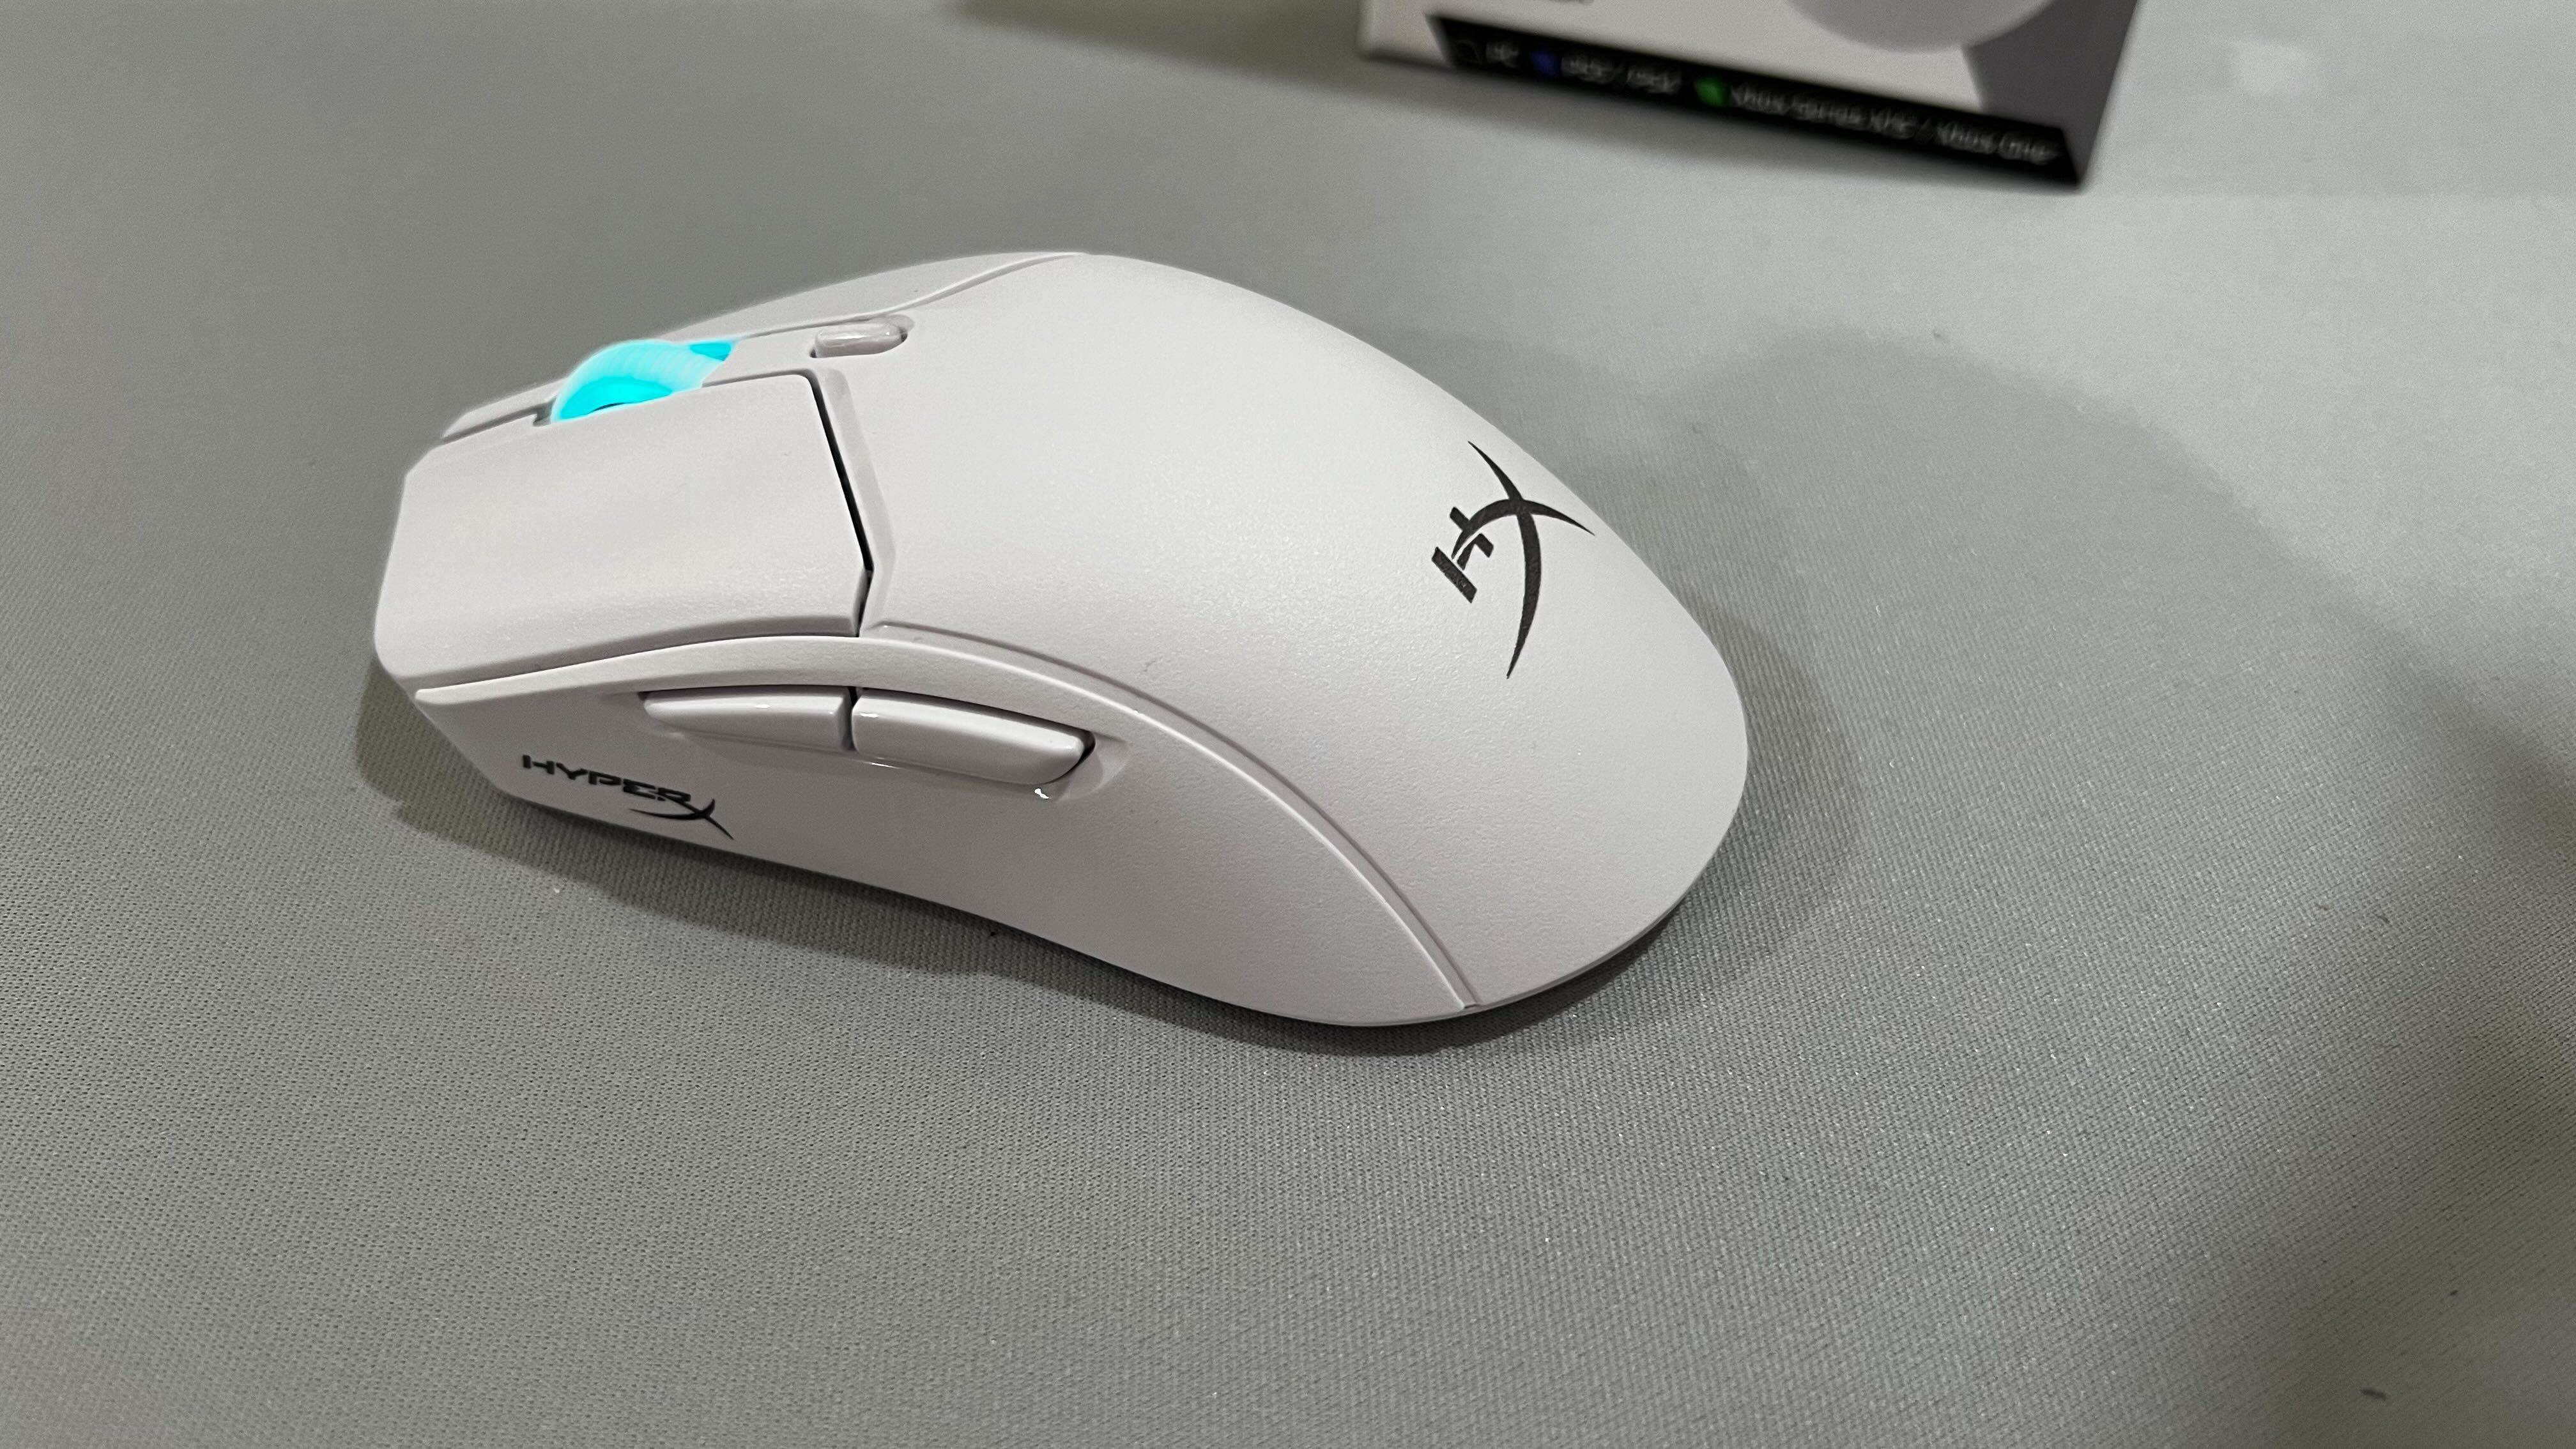 HyperX Pulsefire Haste 2 wireless gaming mouse review